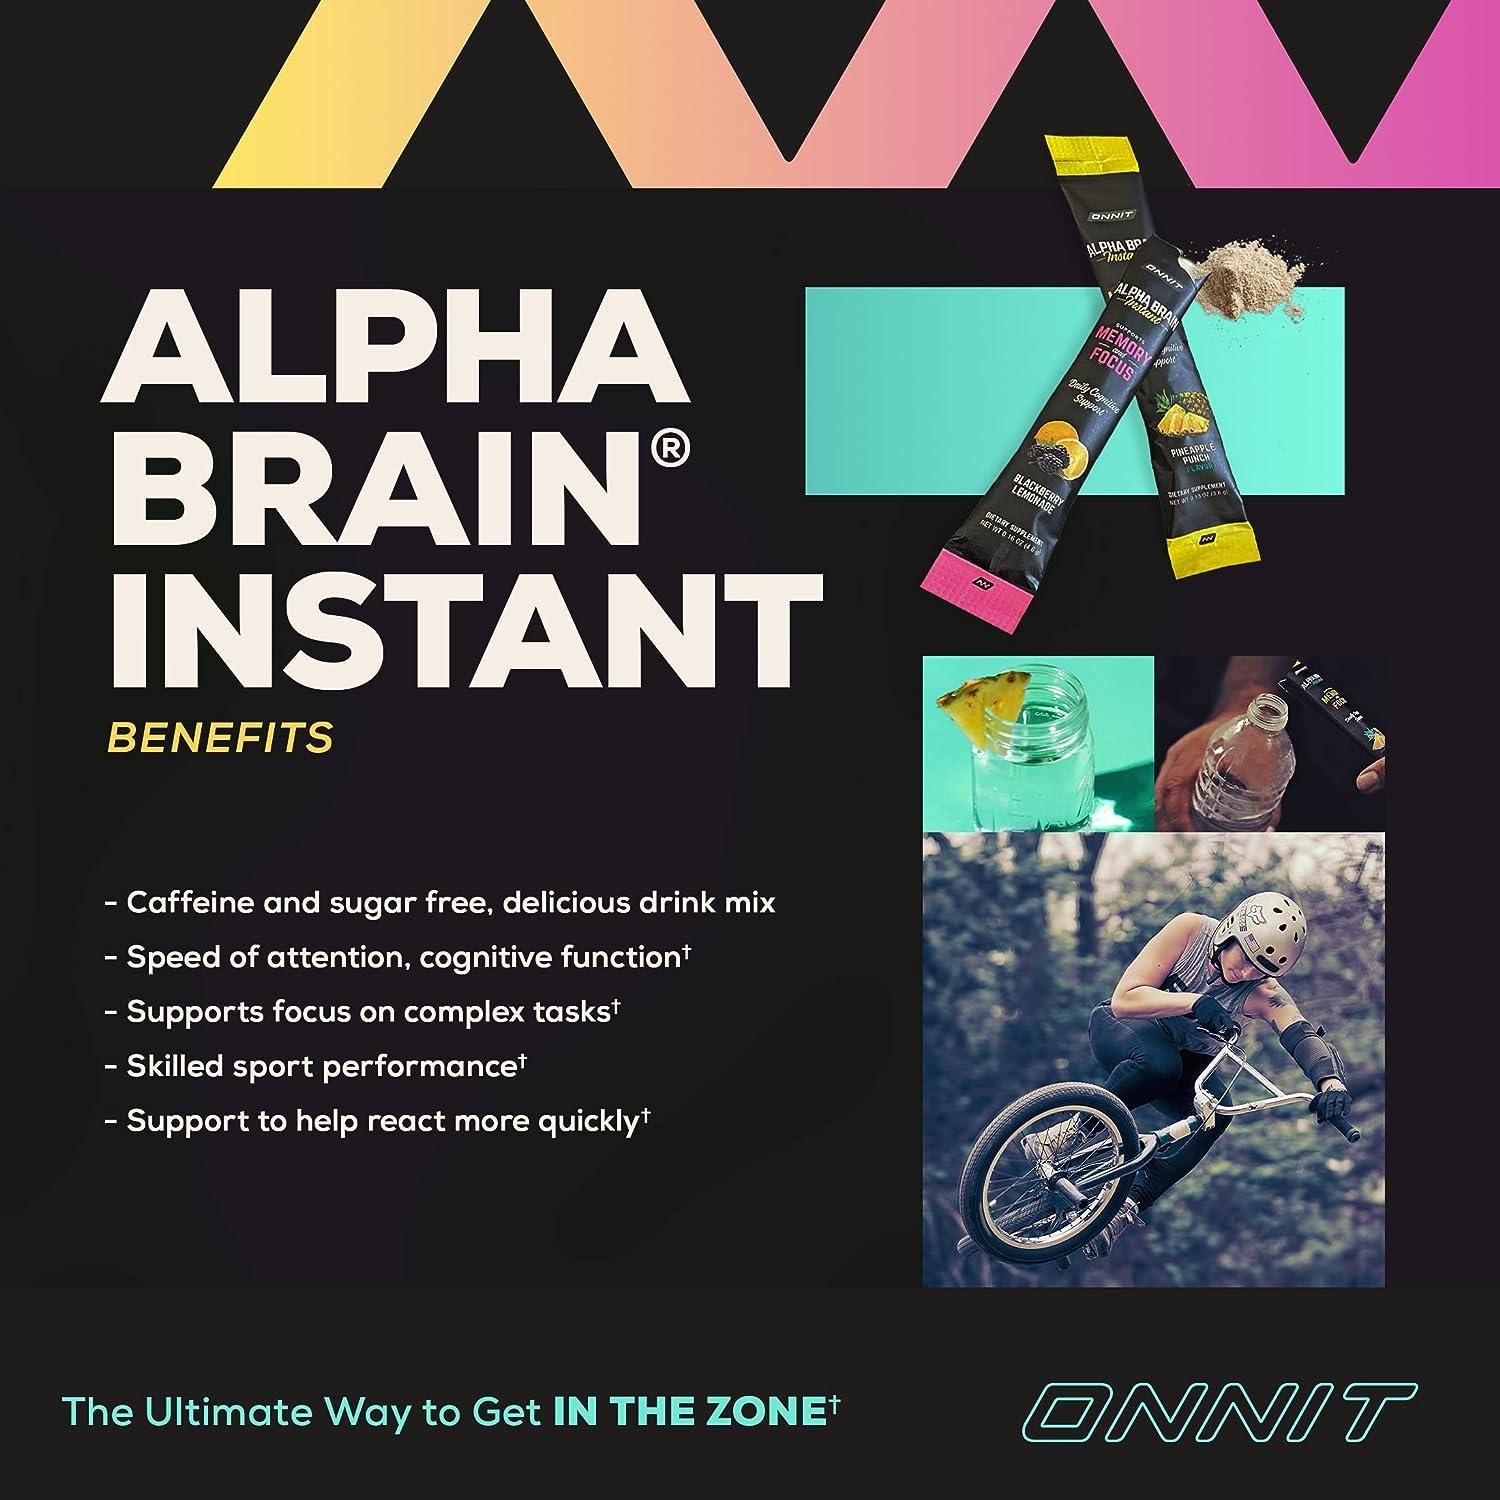 ONNIT Alpha Brain Instant - Pineapple Punch Flavor - Nootropic